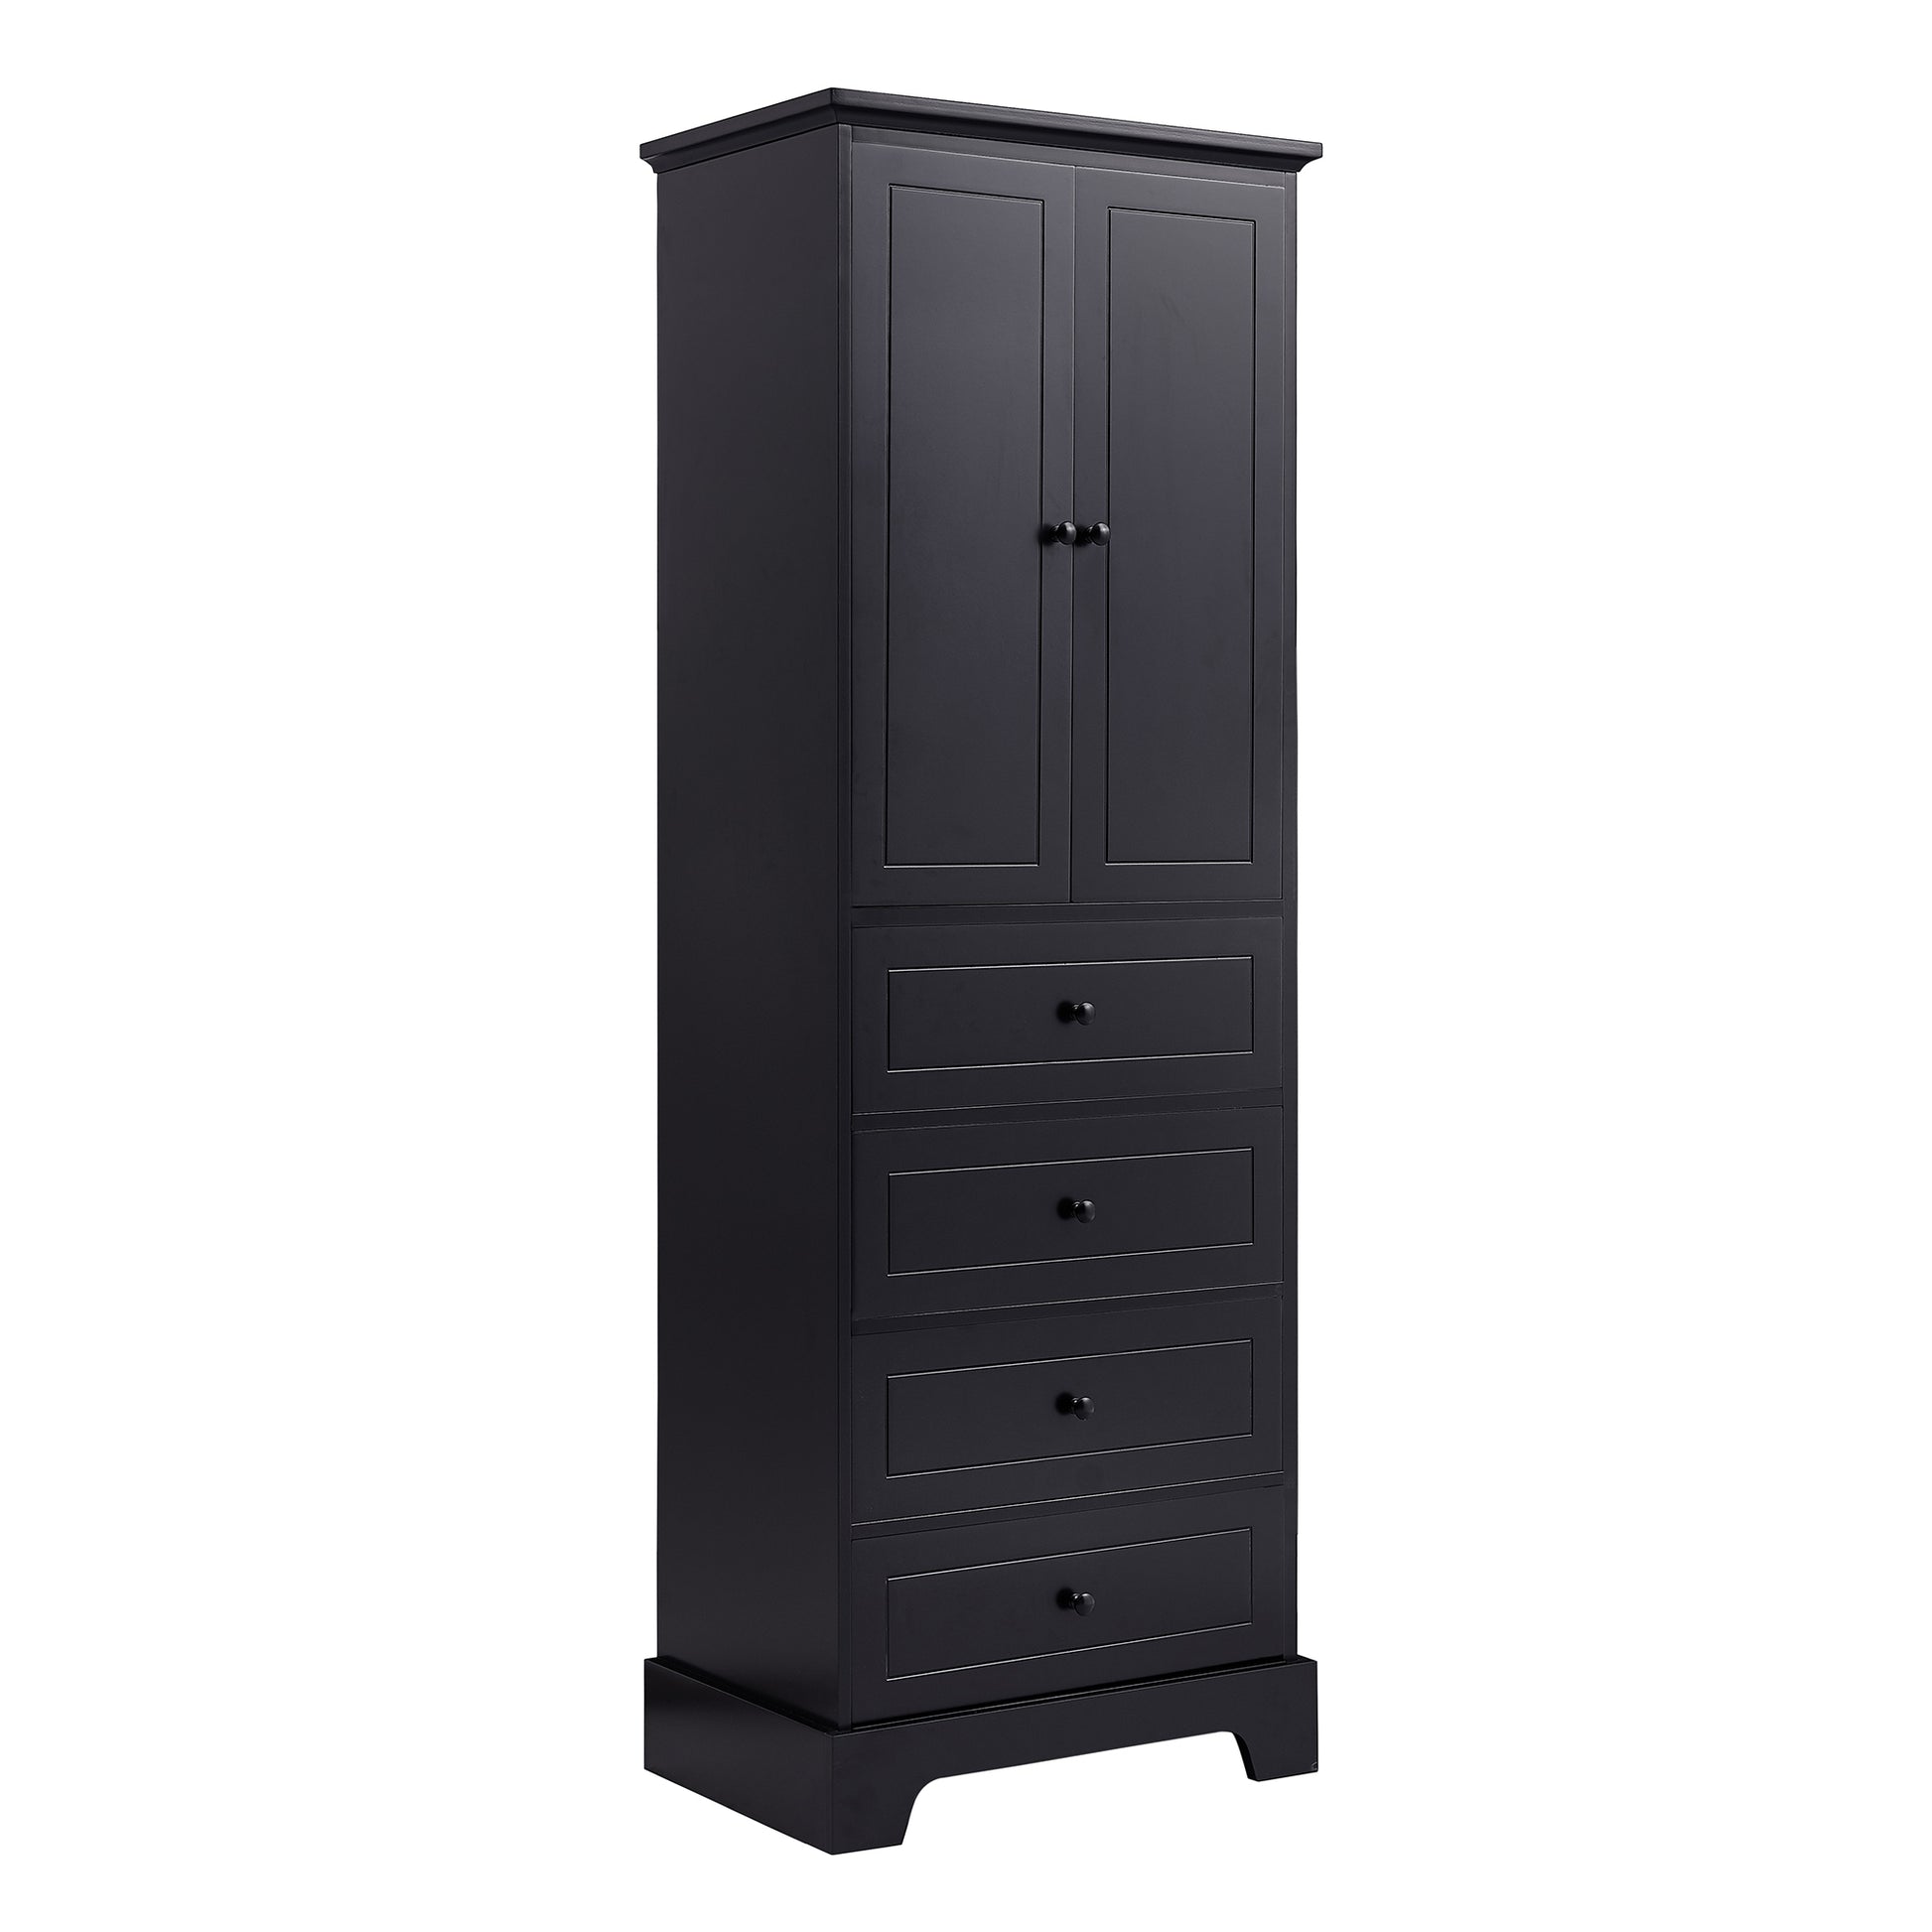 Storage Cabinet with 2 Doors and 4 Drawers for black-mdf